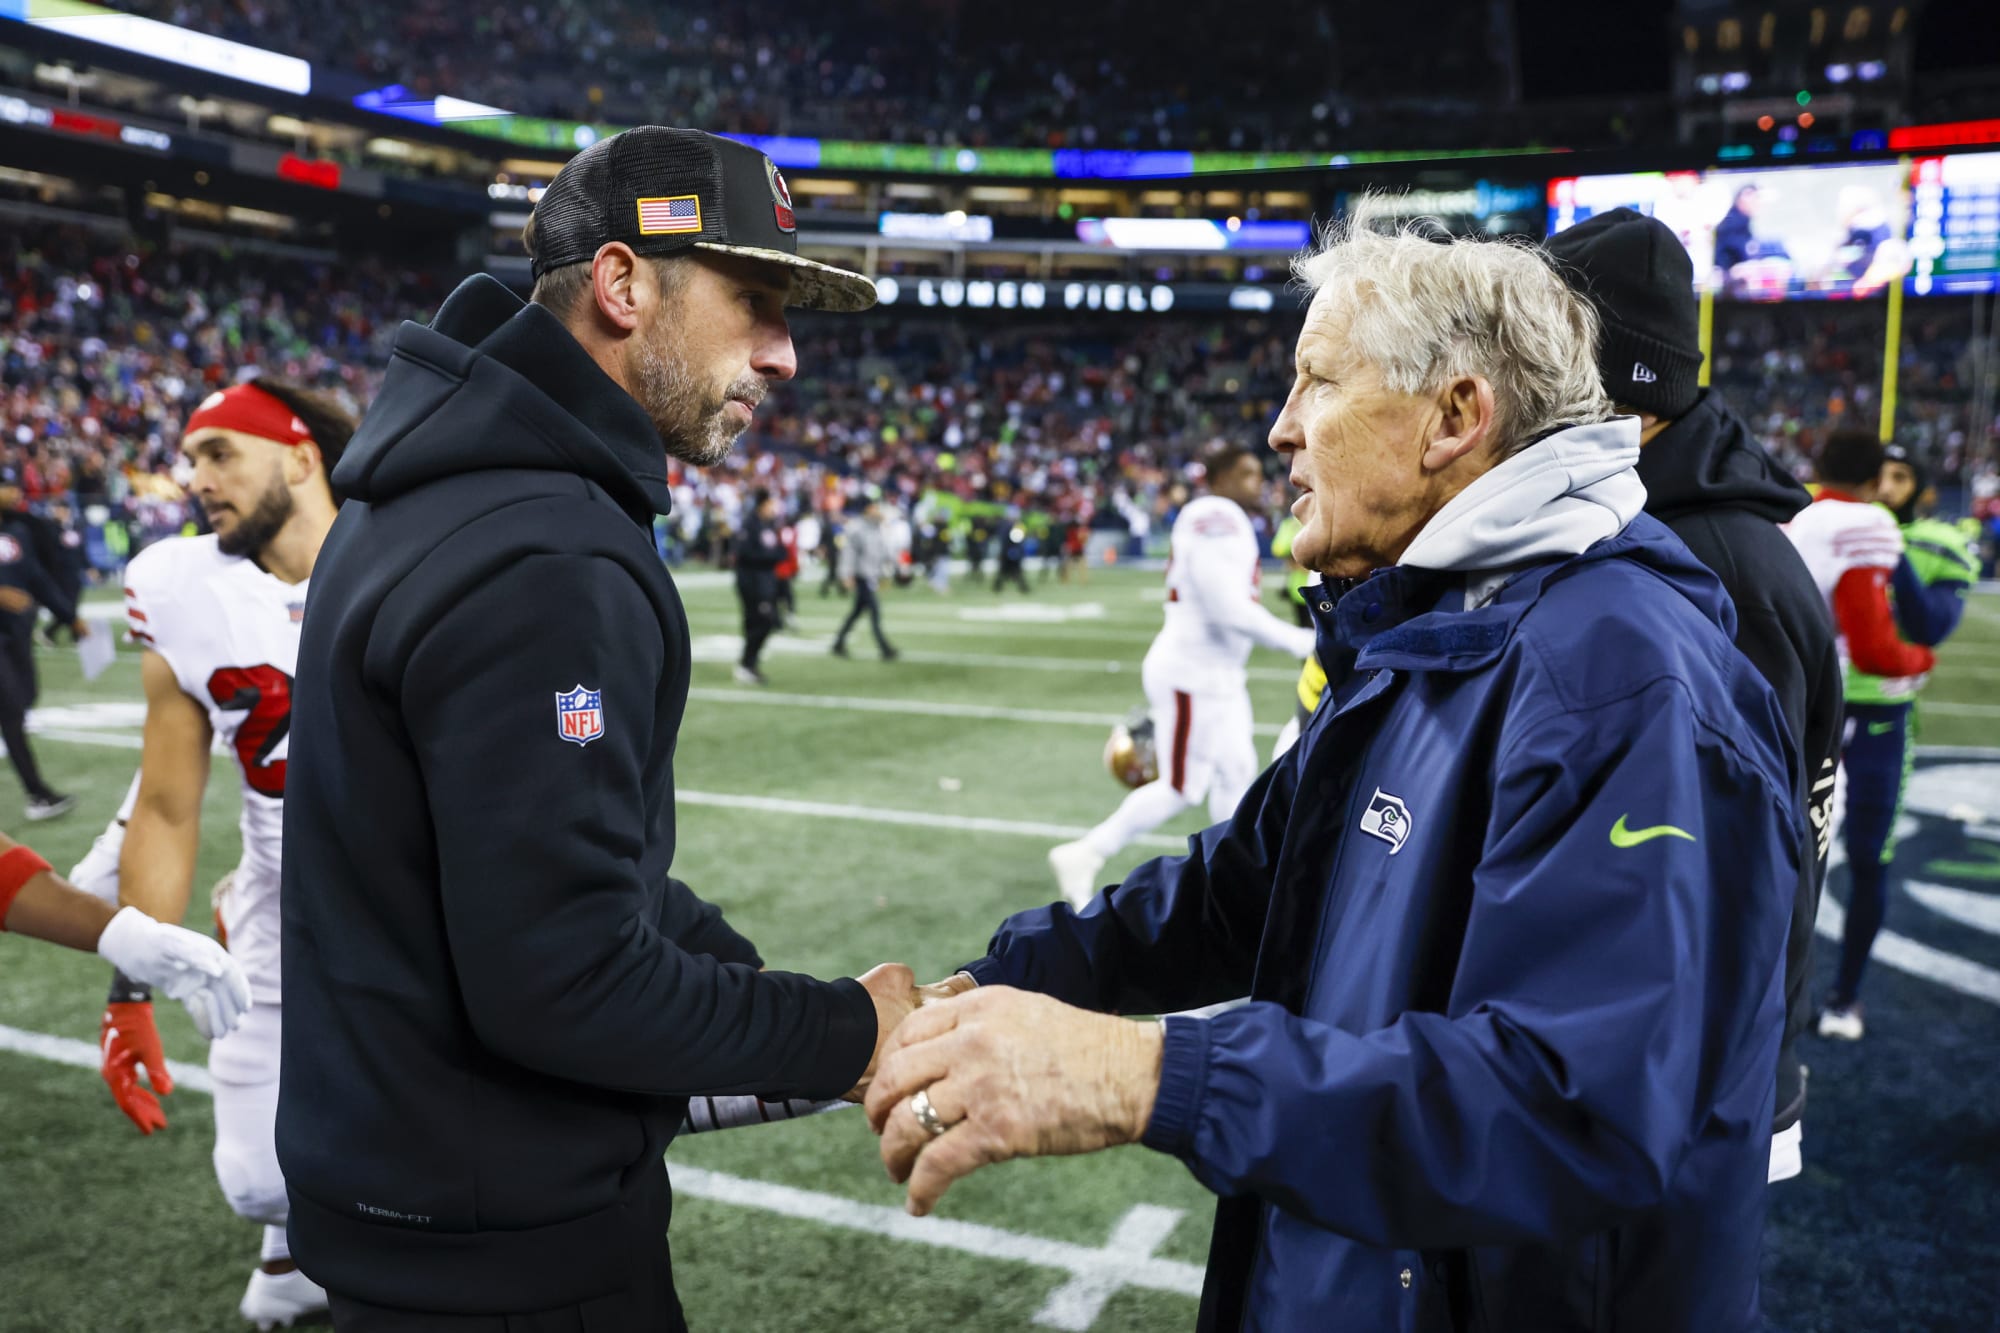 Pete Carroll is either playing mind games or is scared of the 49ers